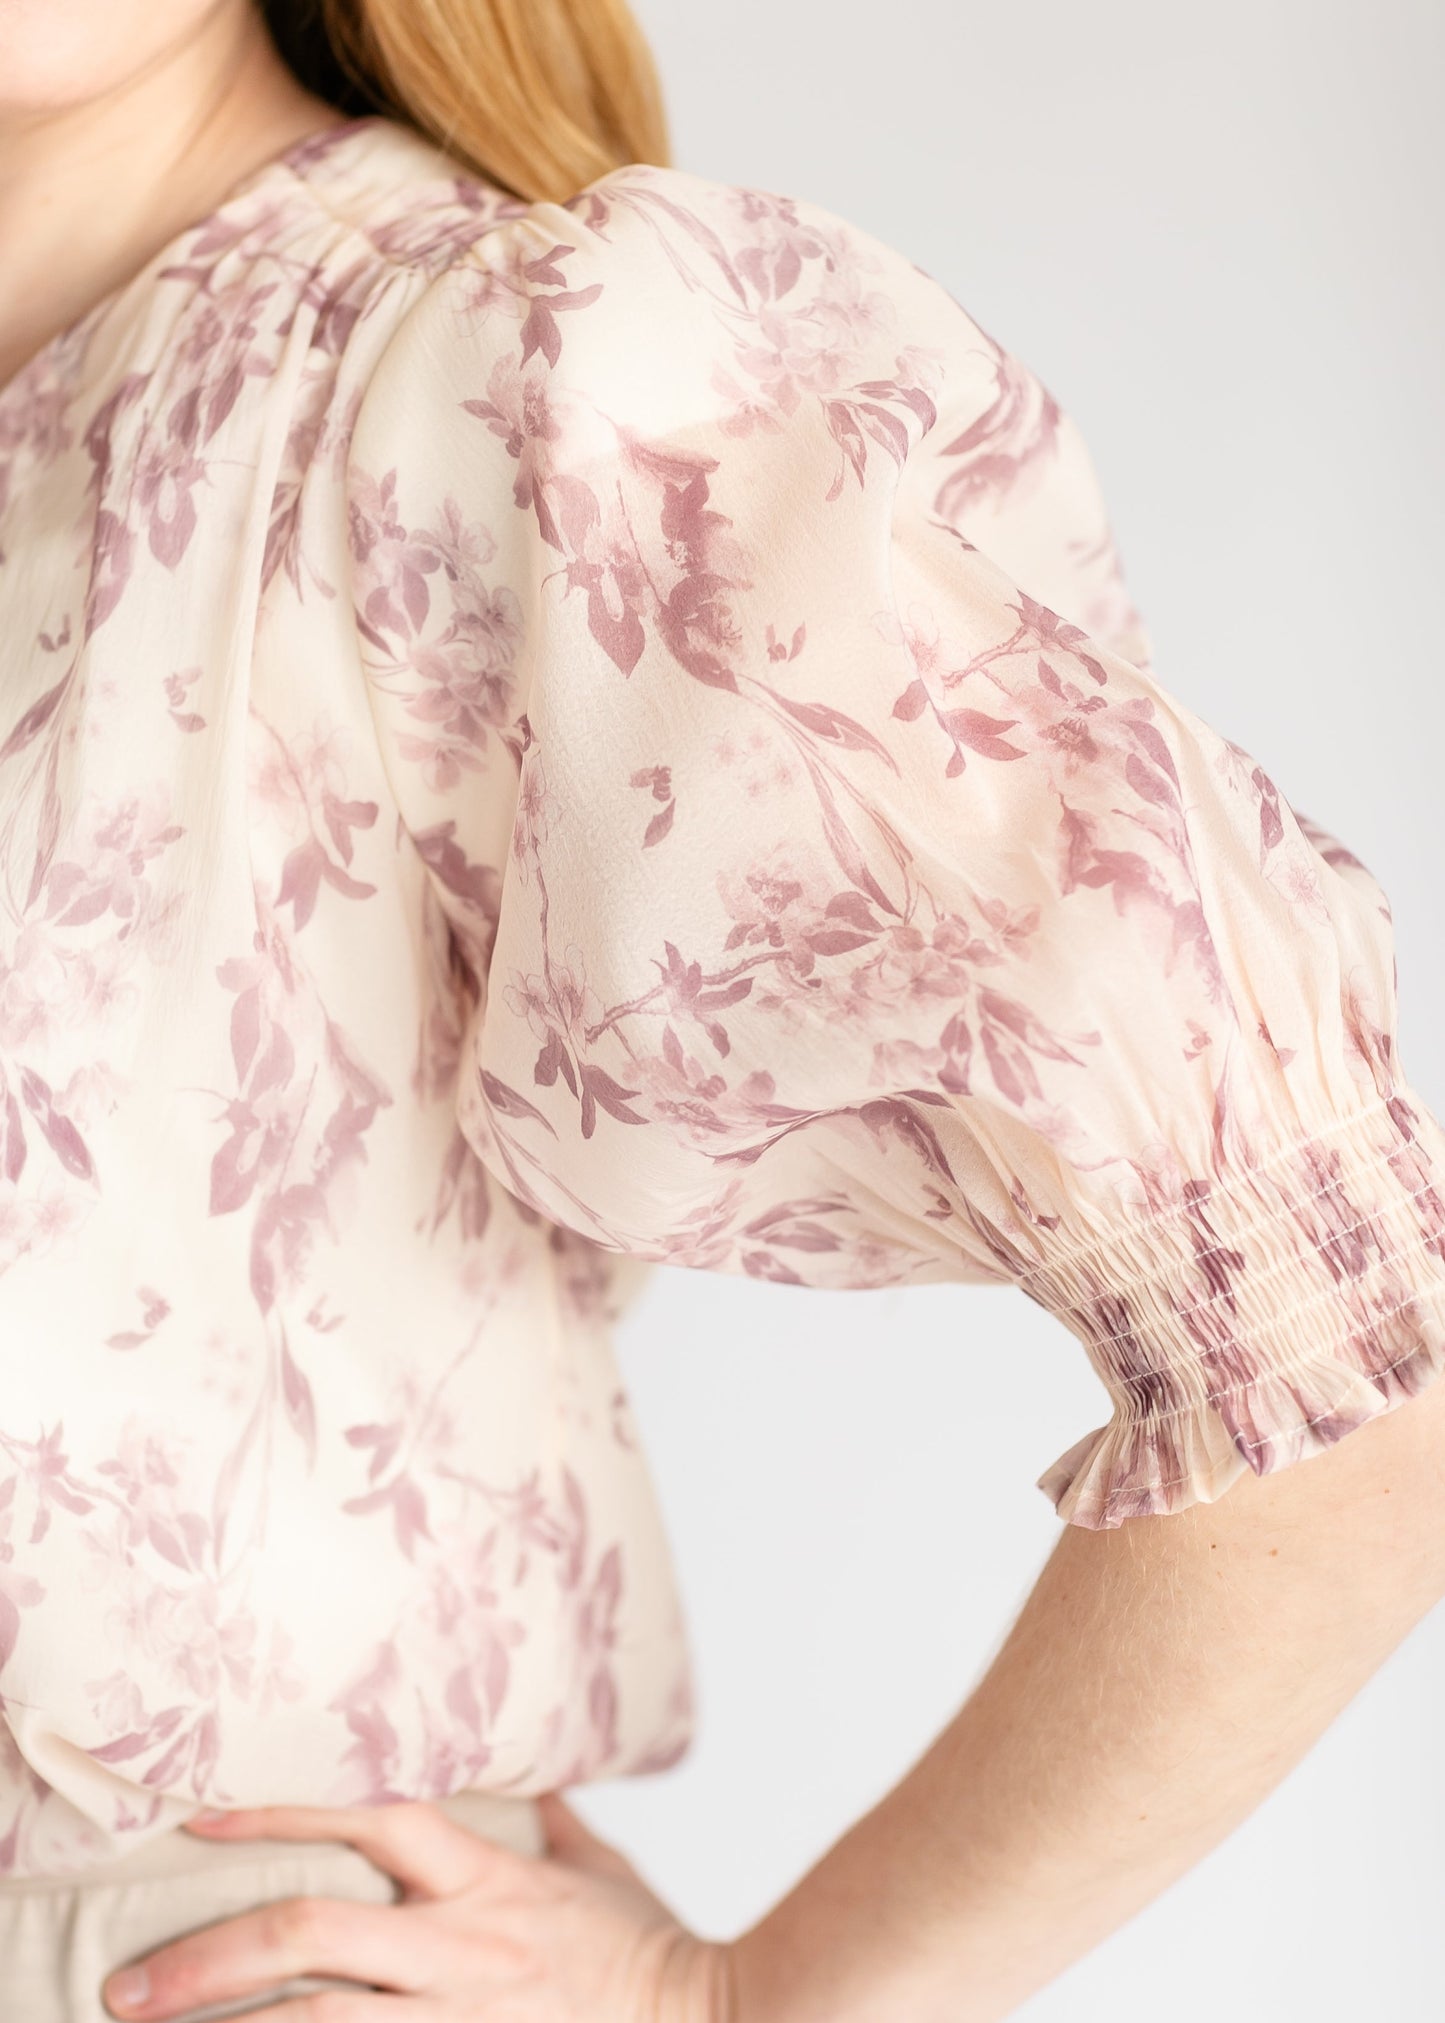 Floral Print Puff Blouse Top FF Tops